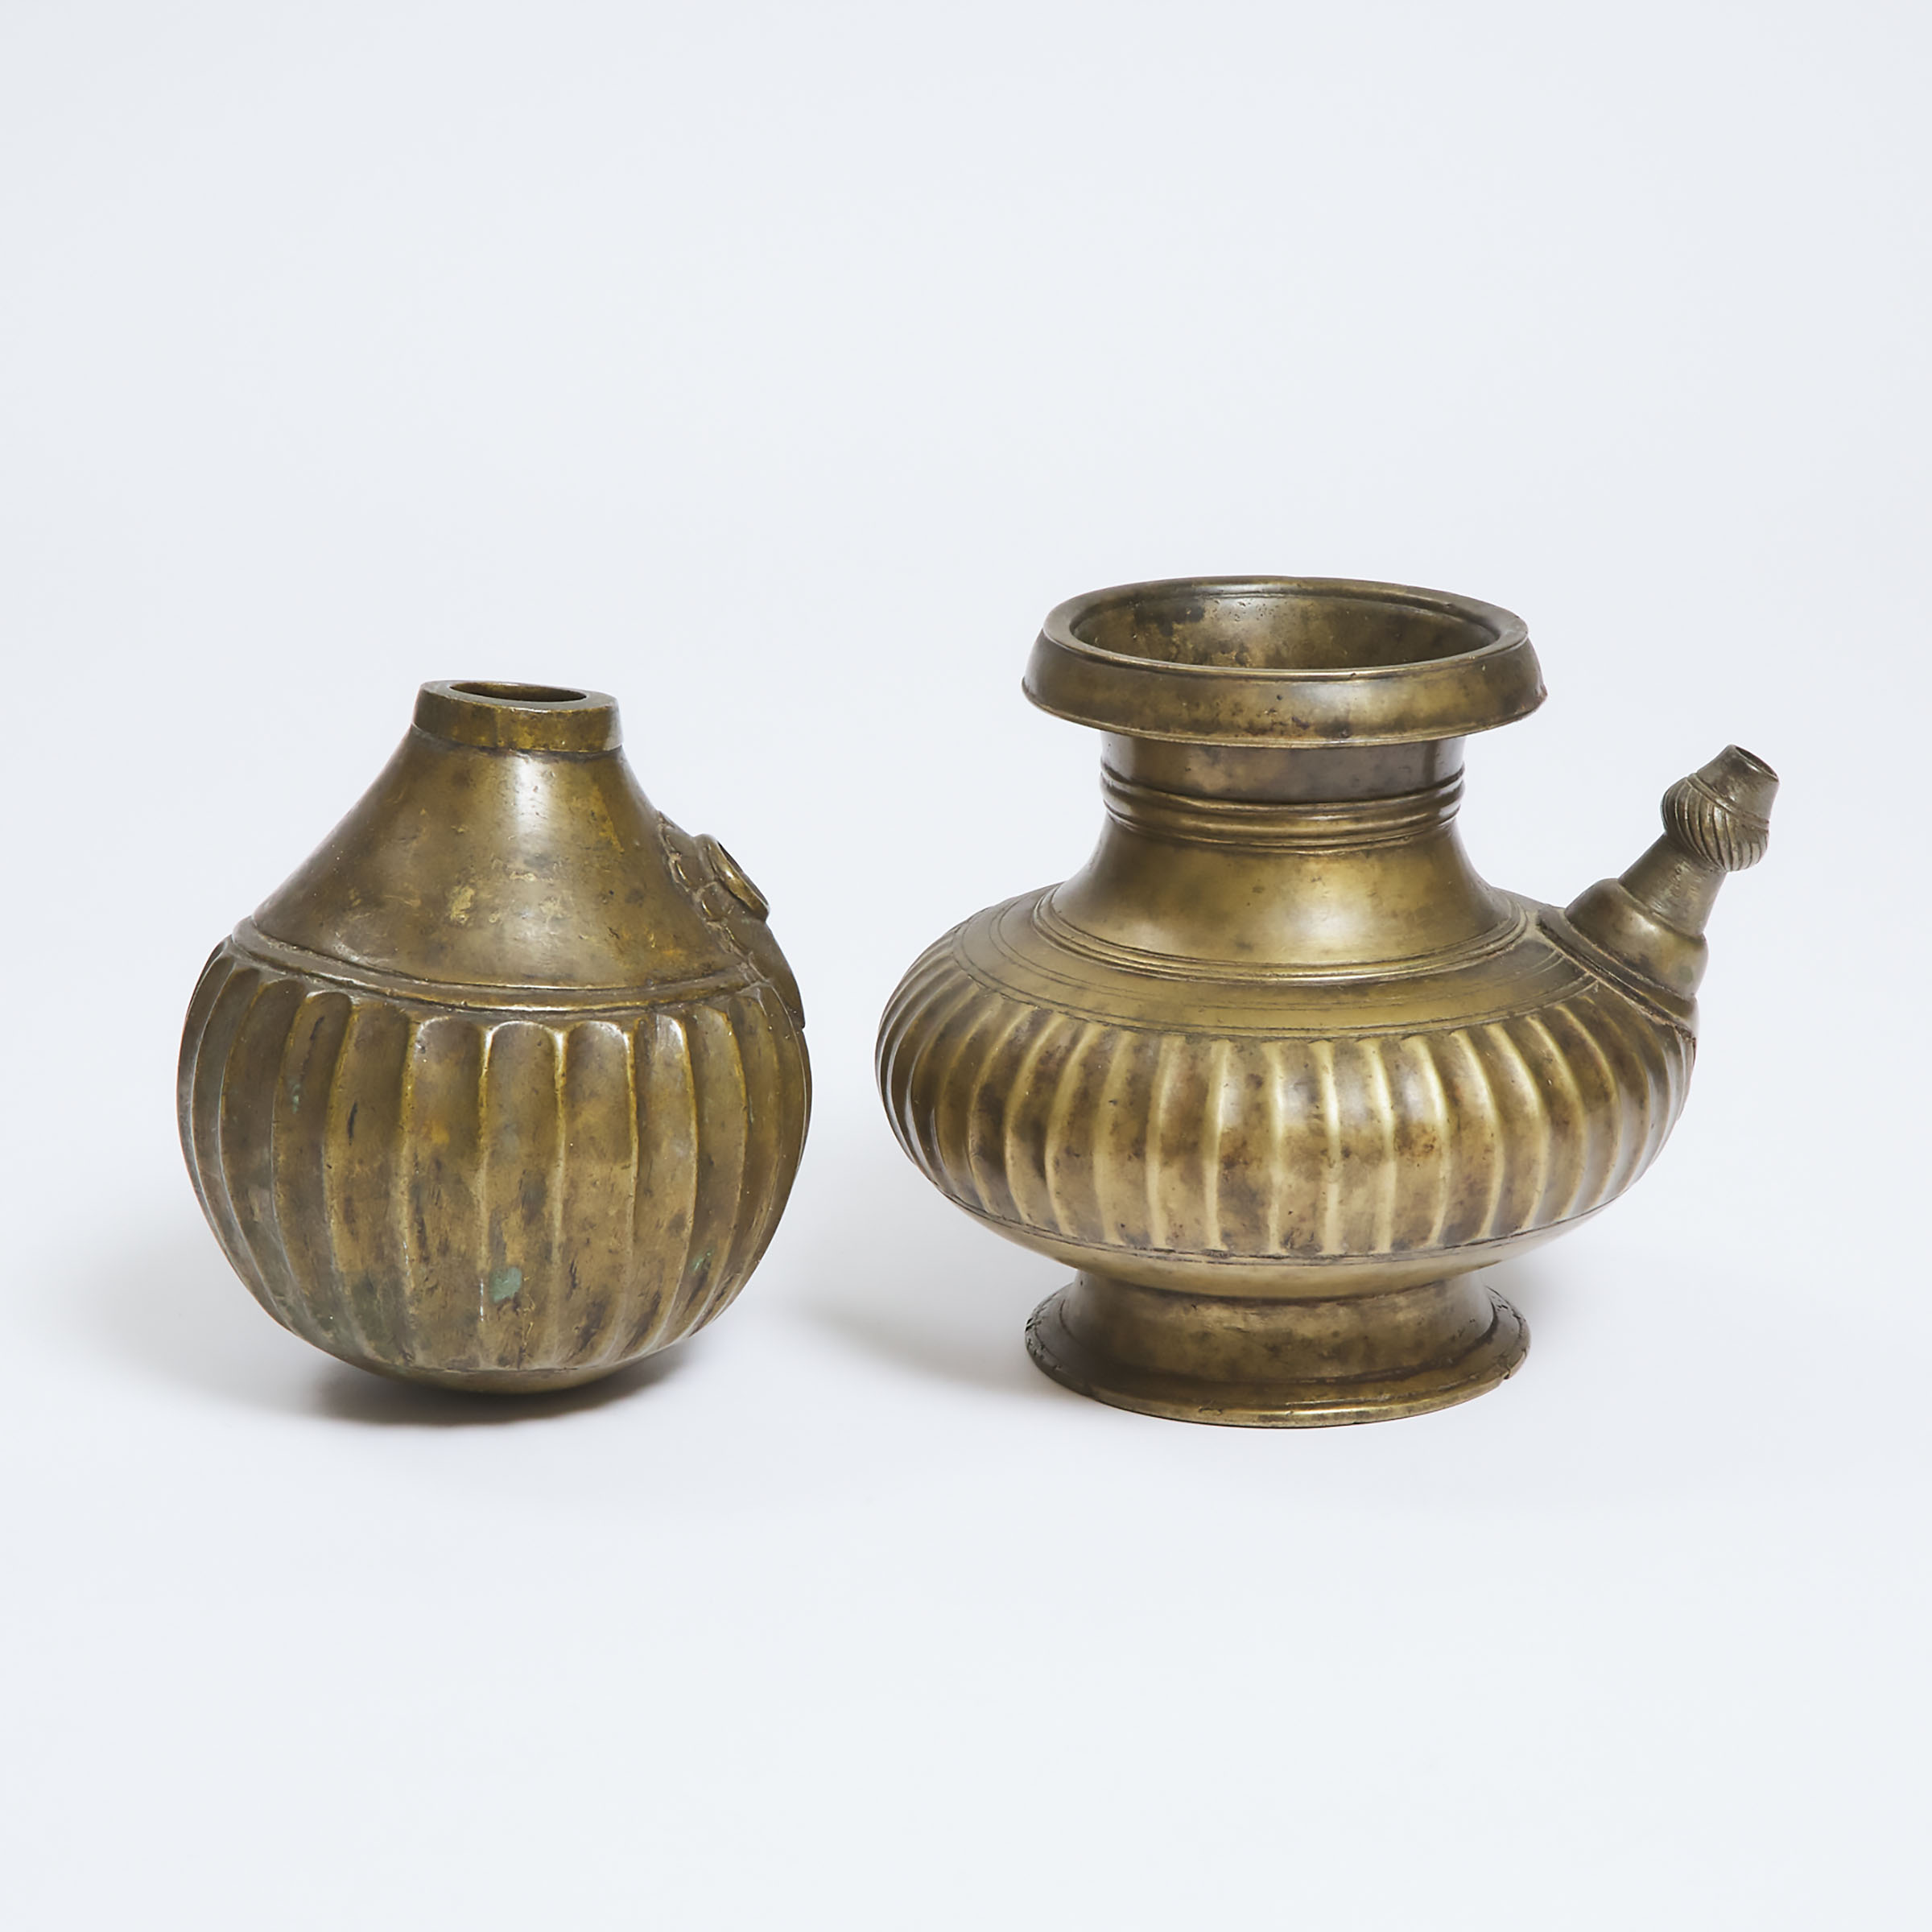 A Bronze Lota Vessel, Together With a Huqqa Base, India, 18th Century